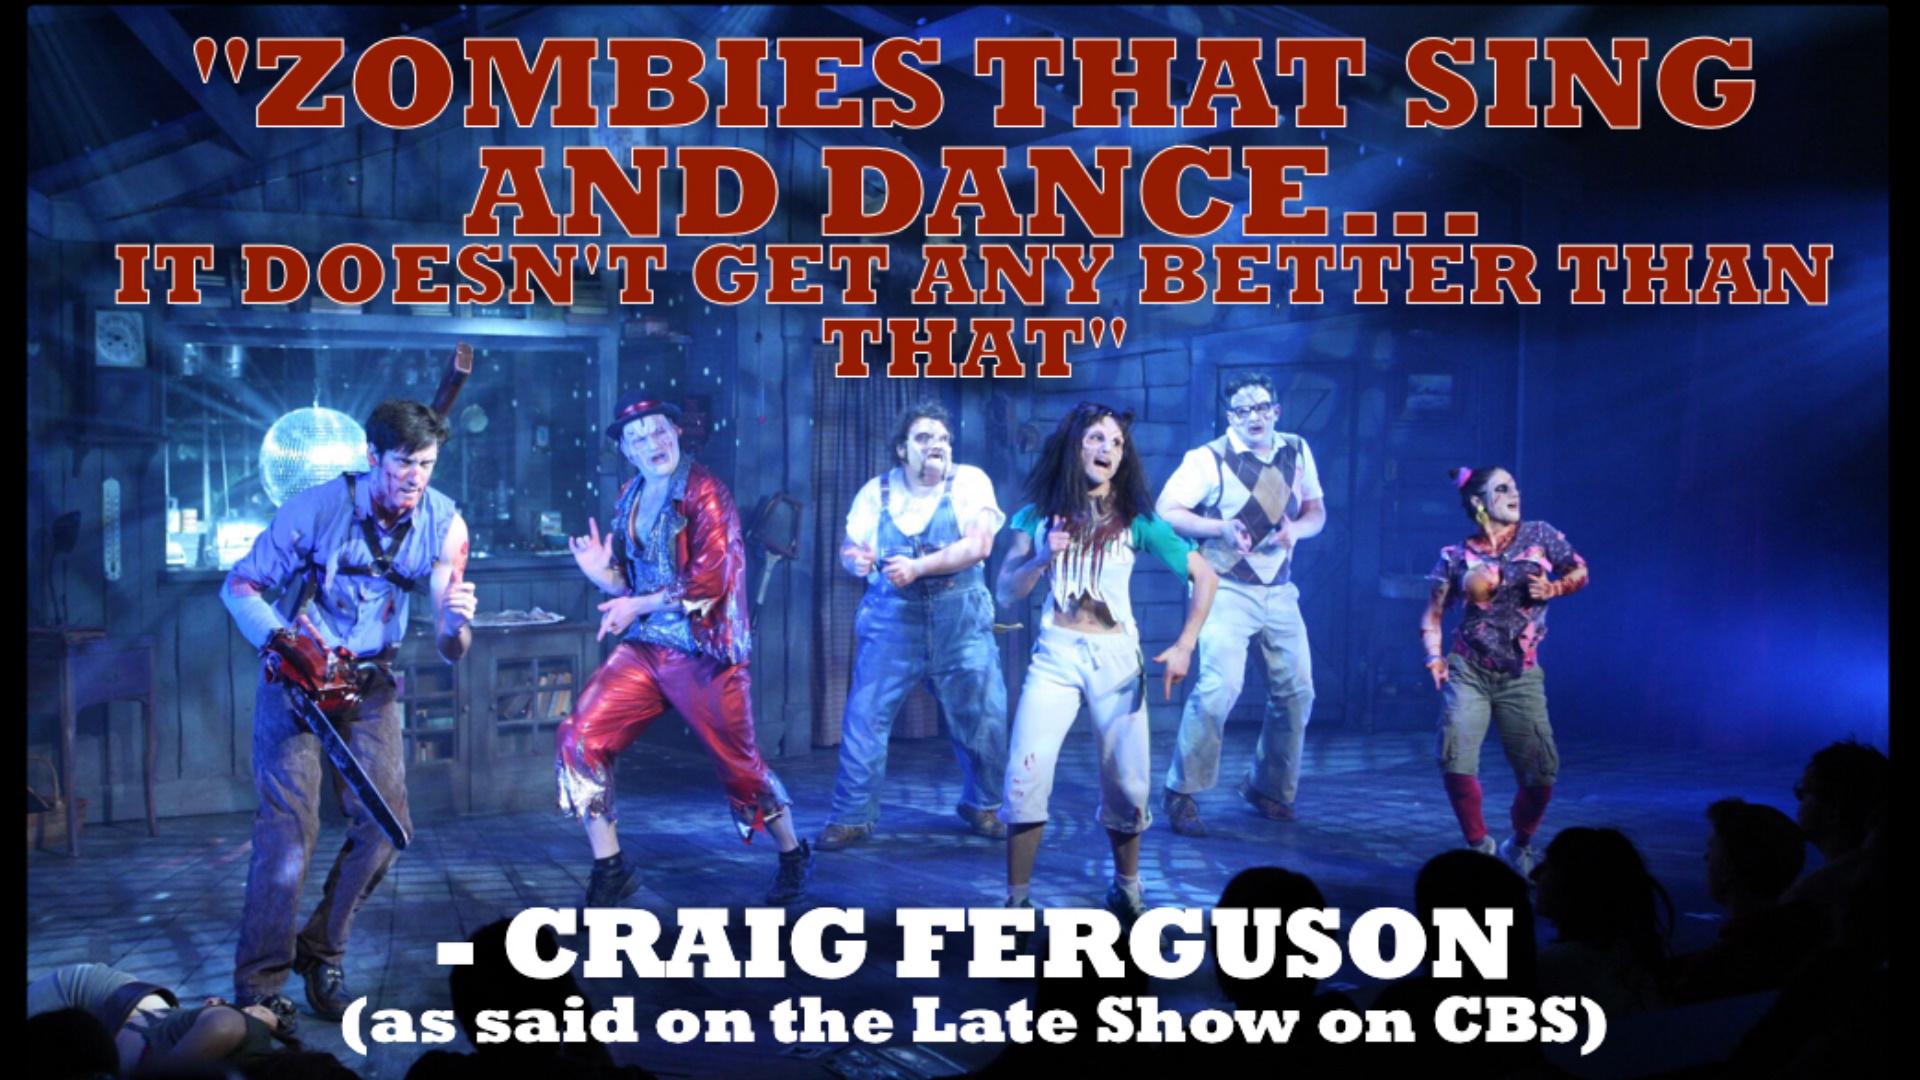 Evil Dead The Musical - Pittsburgh, Official Ticket Source